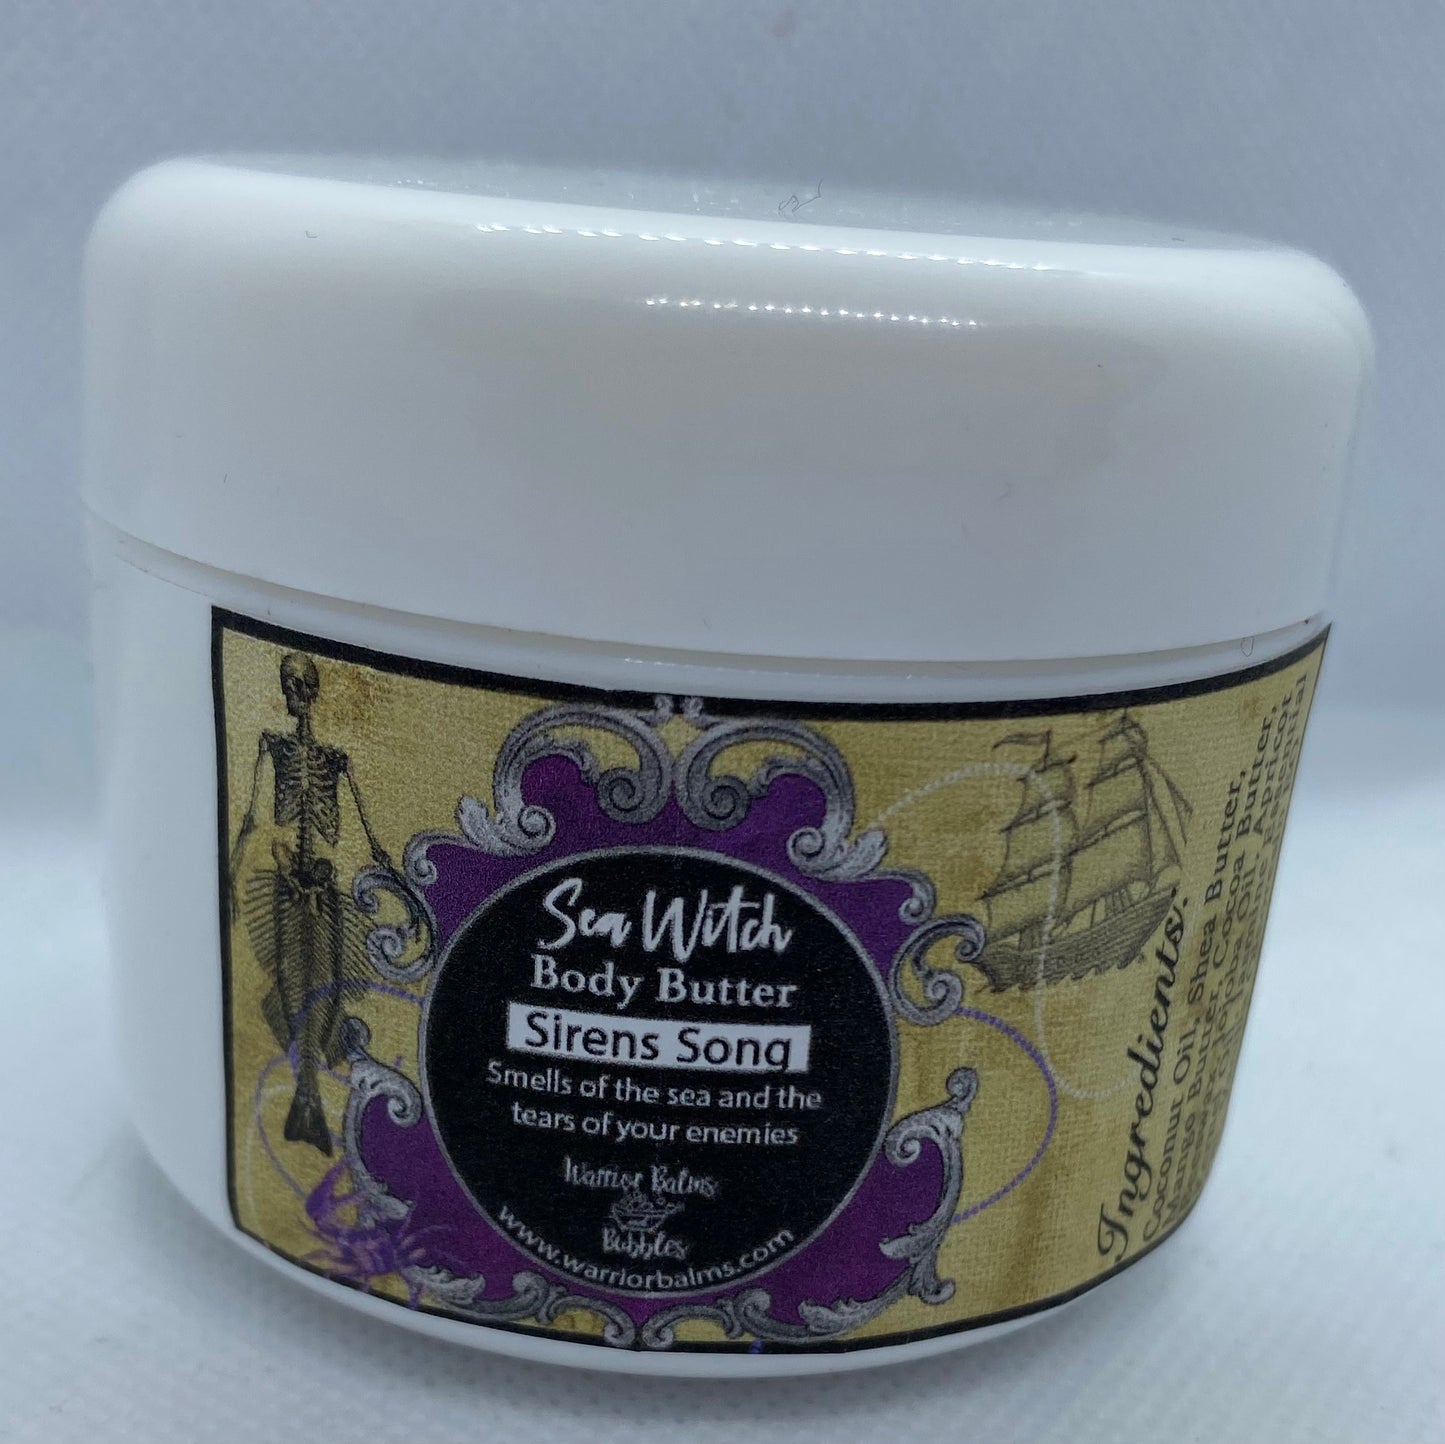 Body Butter Sirens Song 2oz